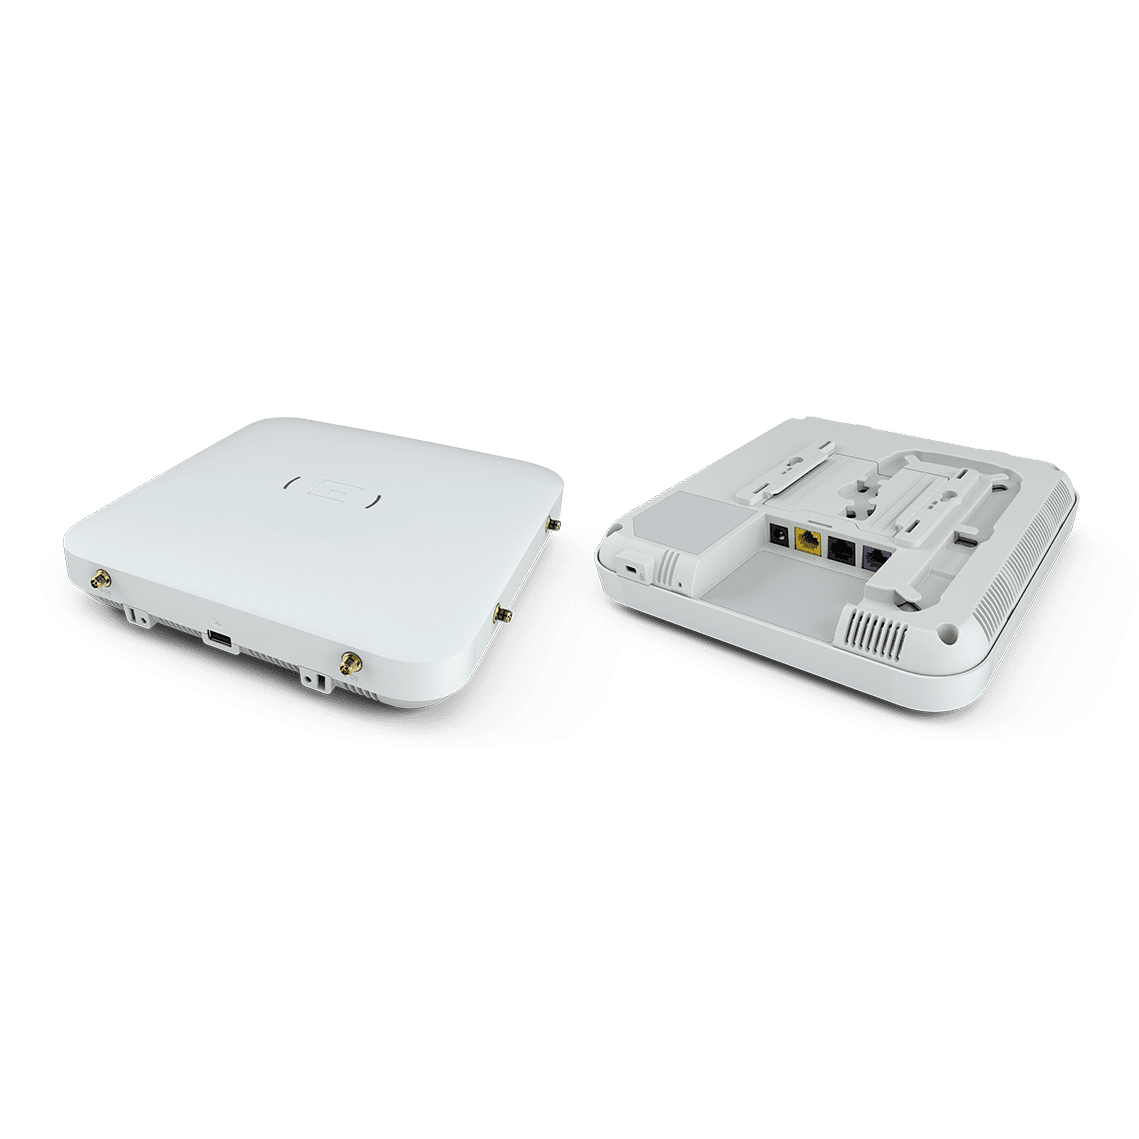 Get Extreme Networks AP510i/e from Malaysia Distributor - vnetwork